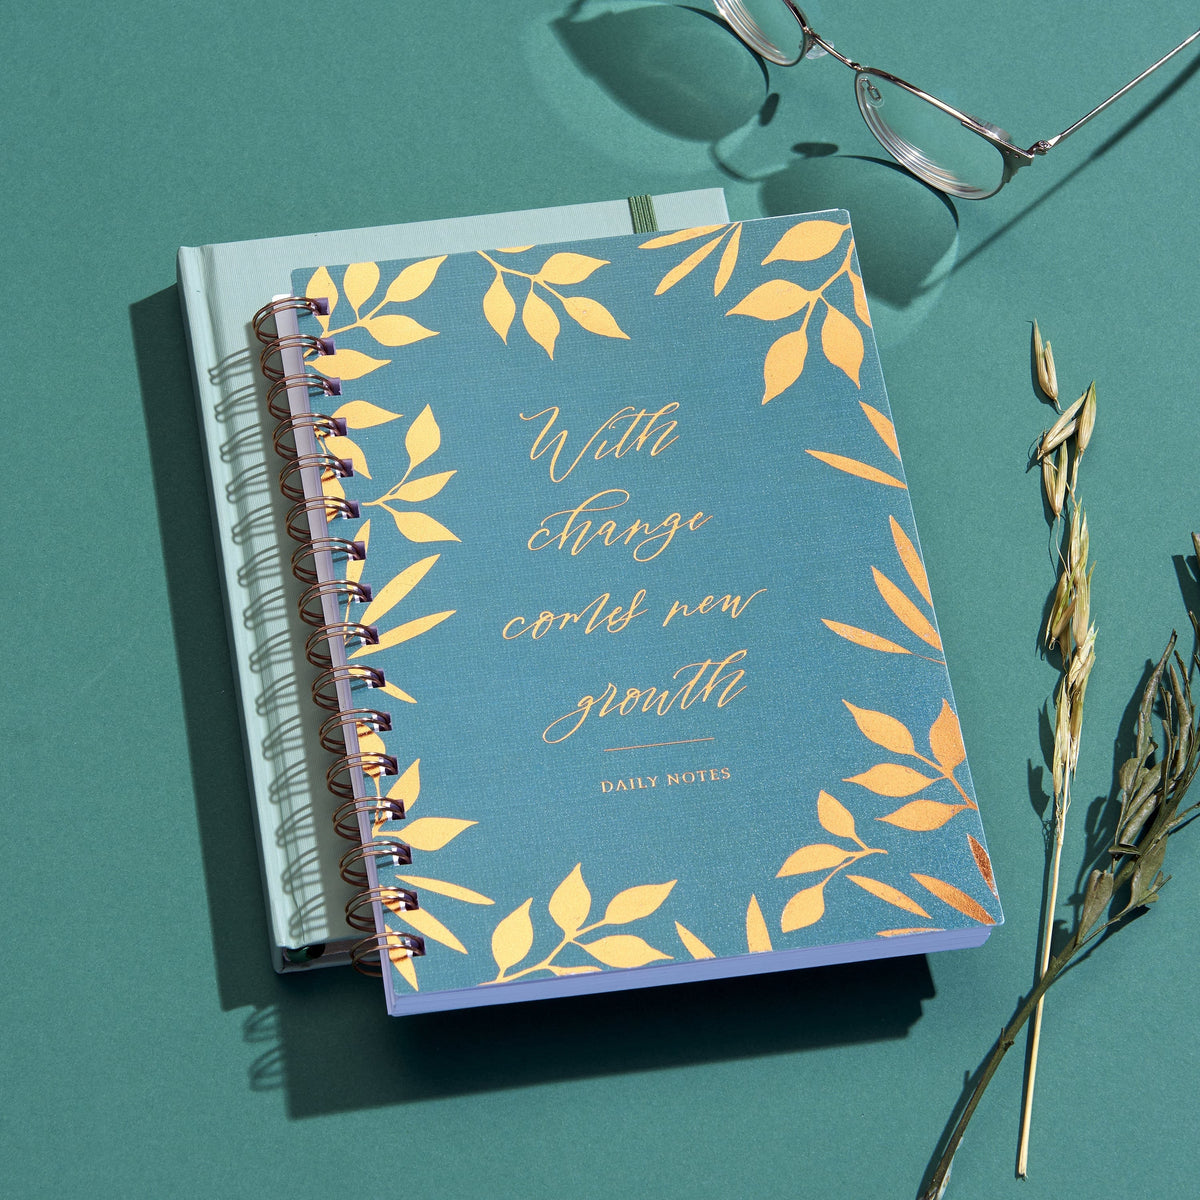 &#39;With Change Comes Growth&#39; Notebook Gartner Studios Notebooks 96201